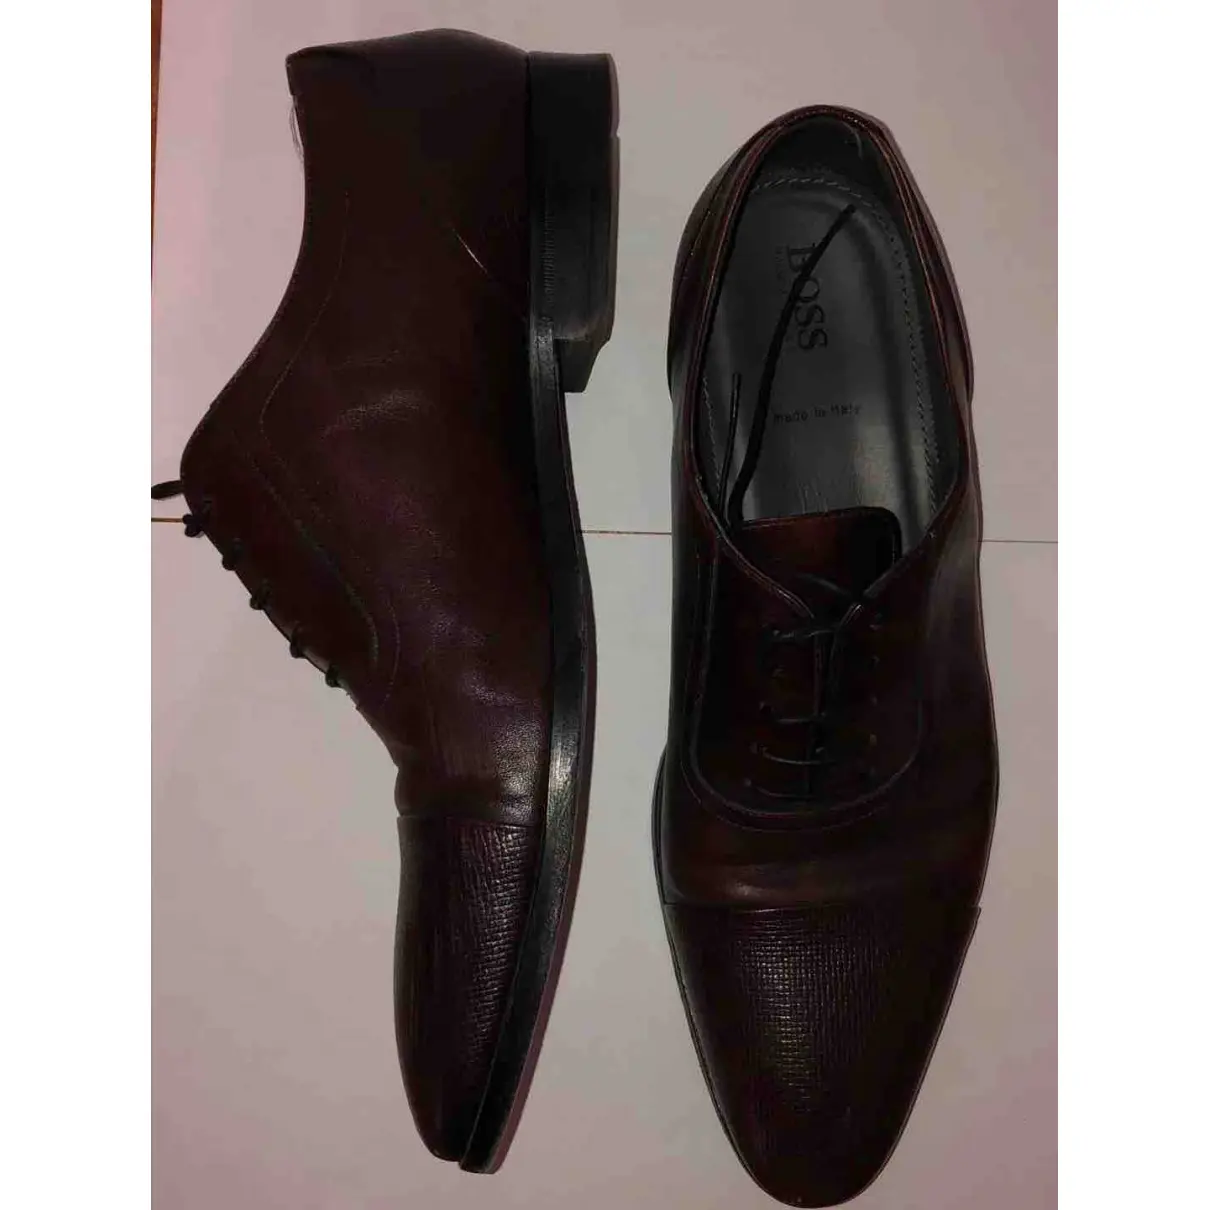 Buy Boss Leather lace ups online